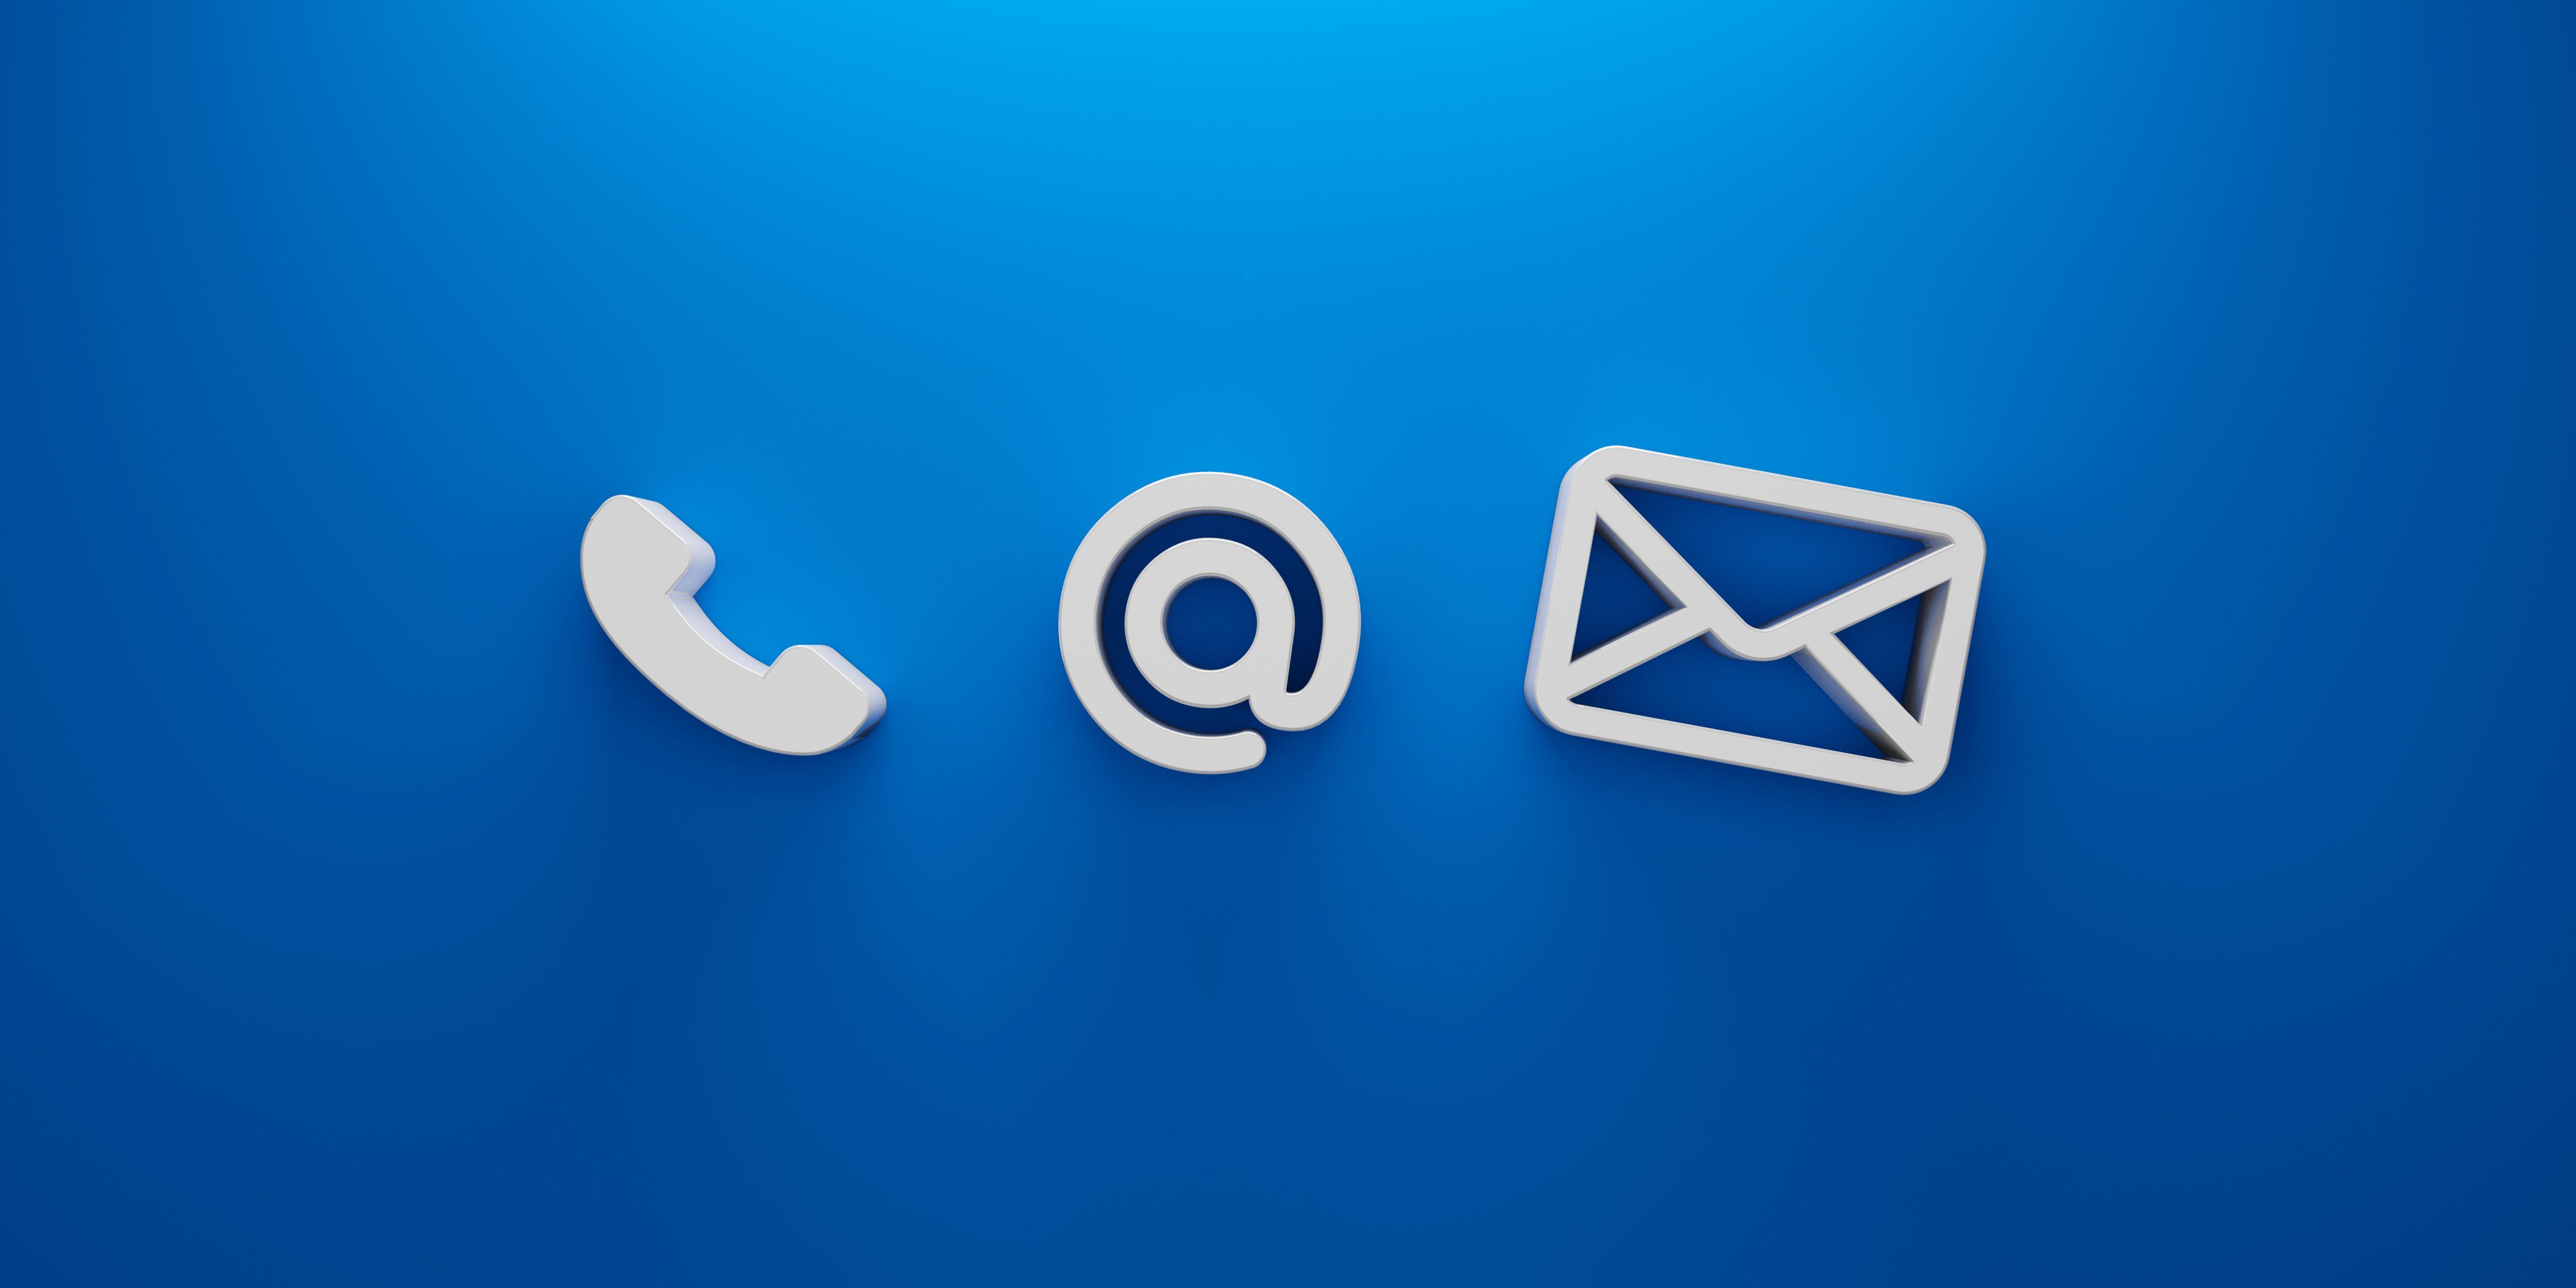 Stylized "contact us" concept with icons of telephone, address, and email on blue background